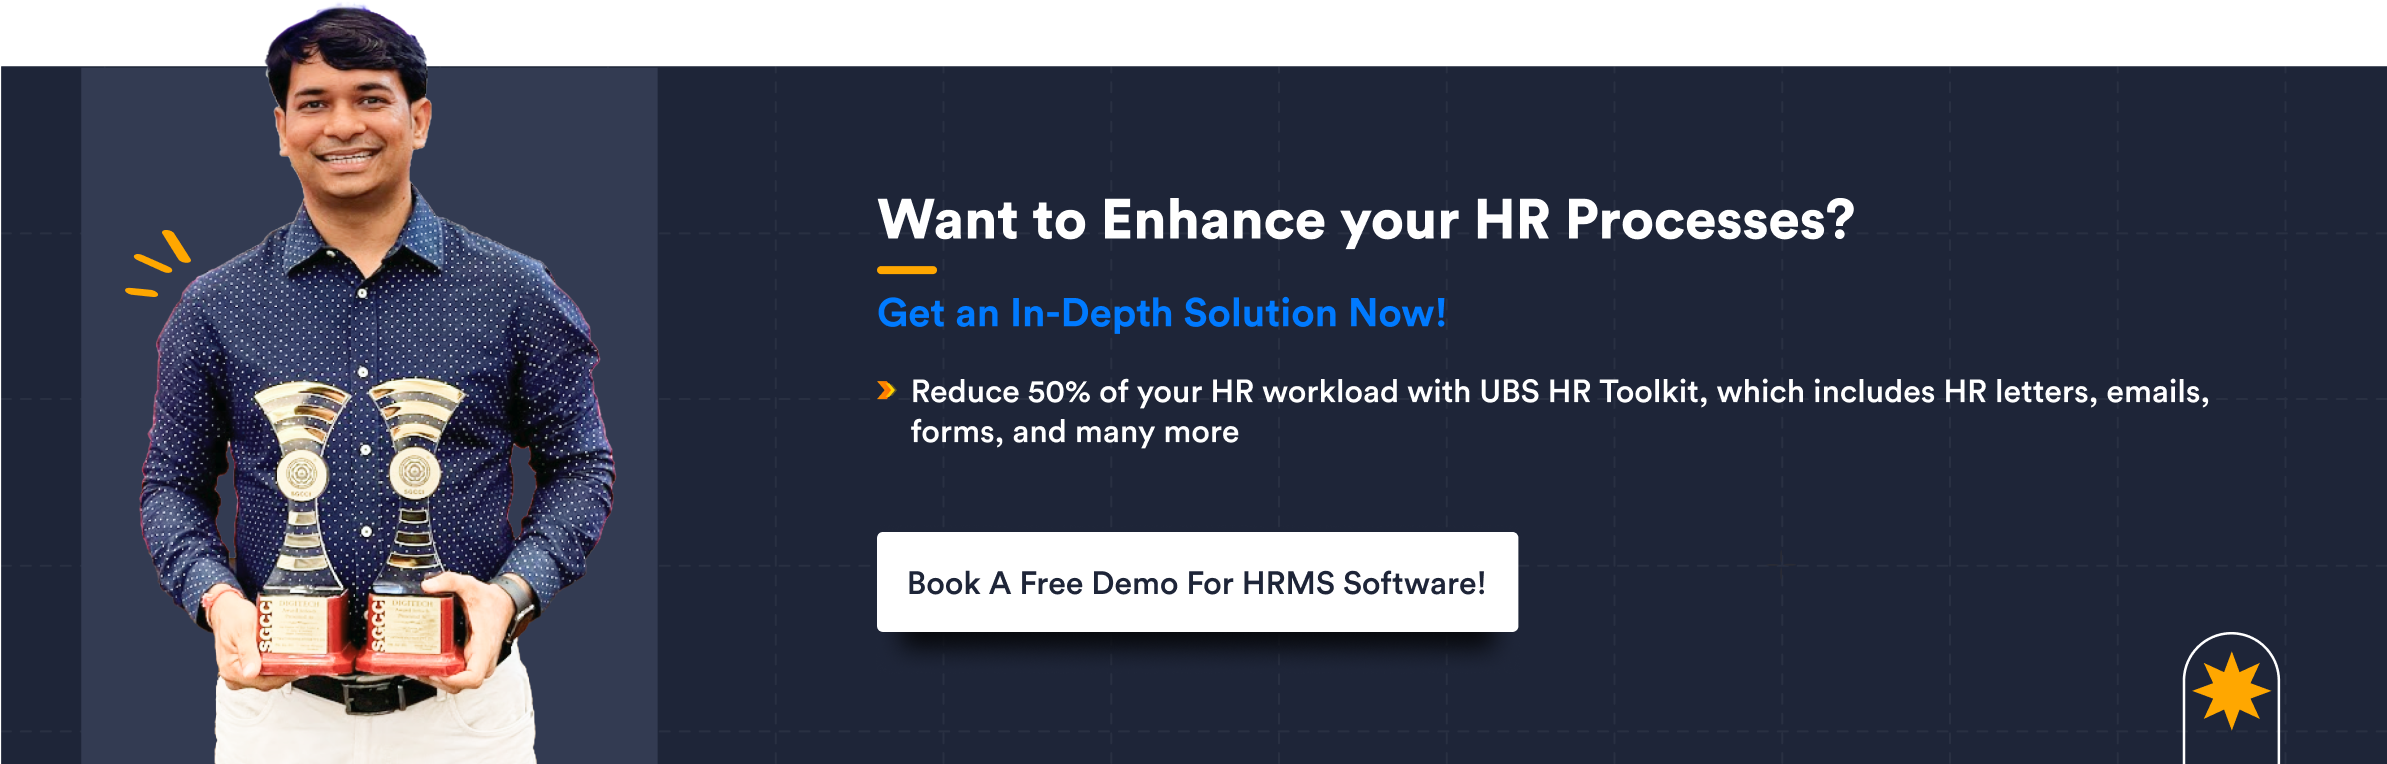 Want to Enhance your HR Processes